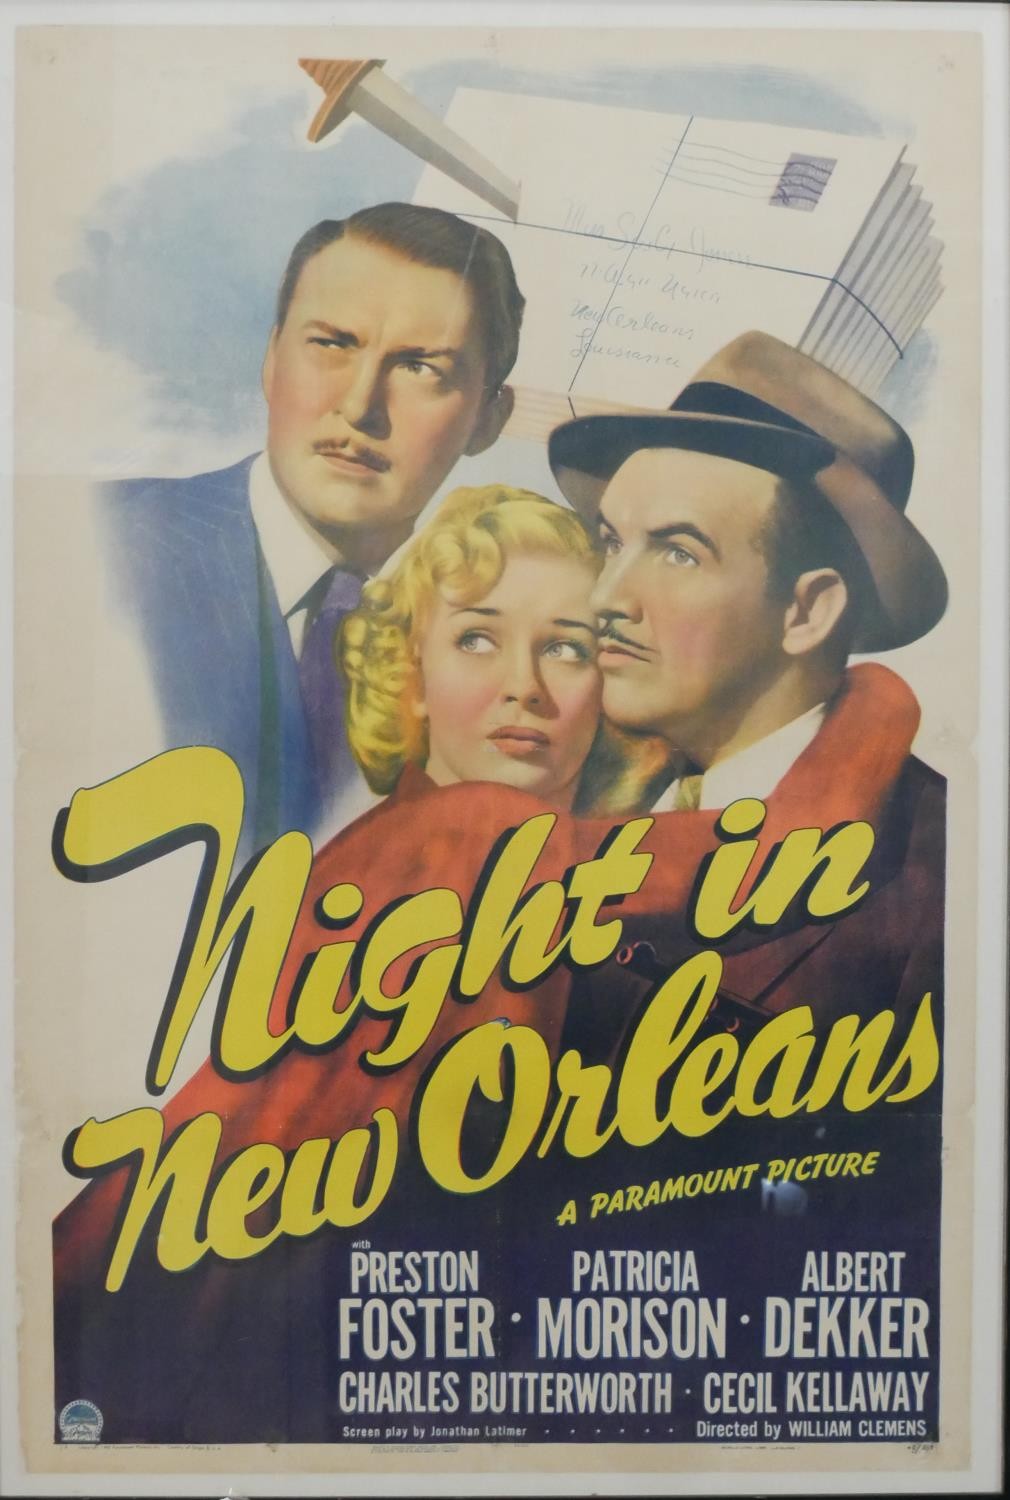 A 1940s linen backed film poster for Night in New Orleans, directed by William Clemens, starring